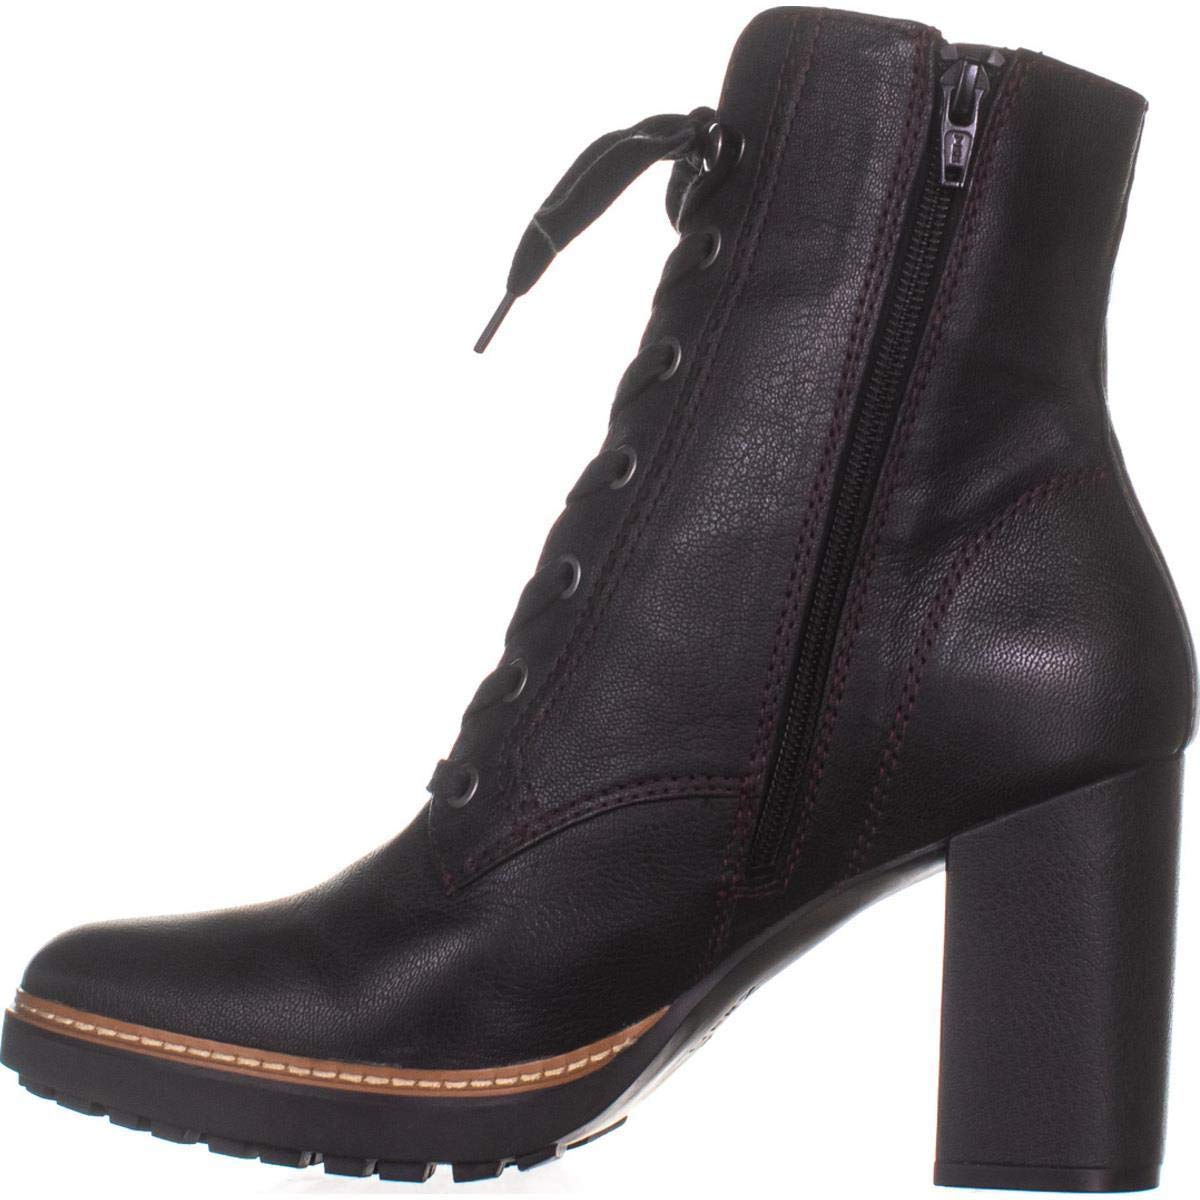 Naturalizer Womens Boots in Black Color, Size 7.5 RAL | eBay